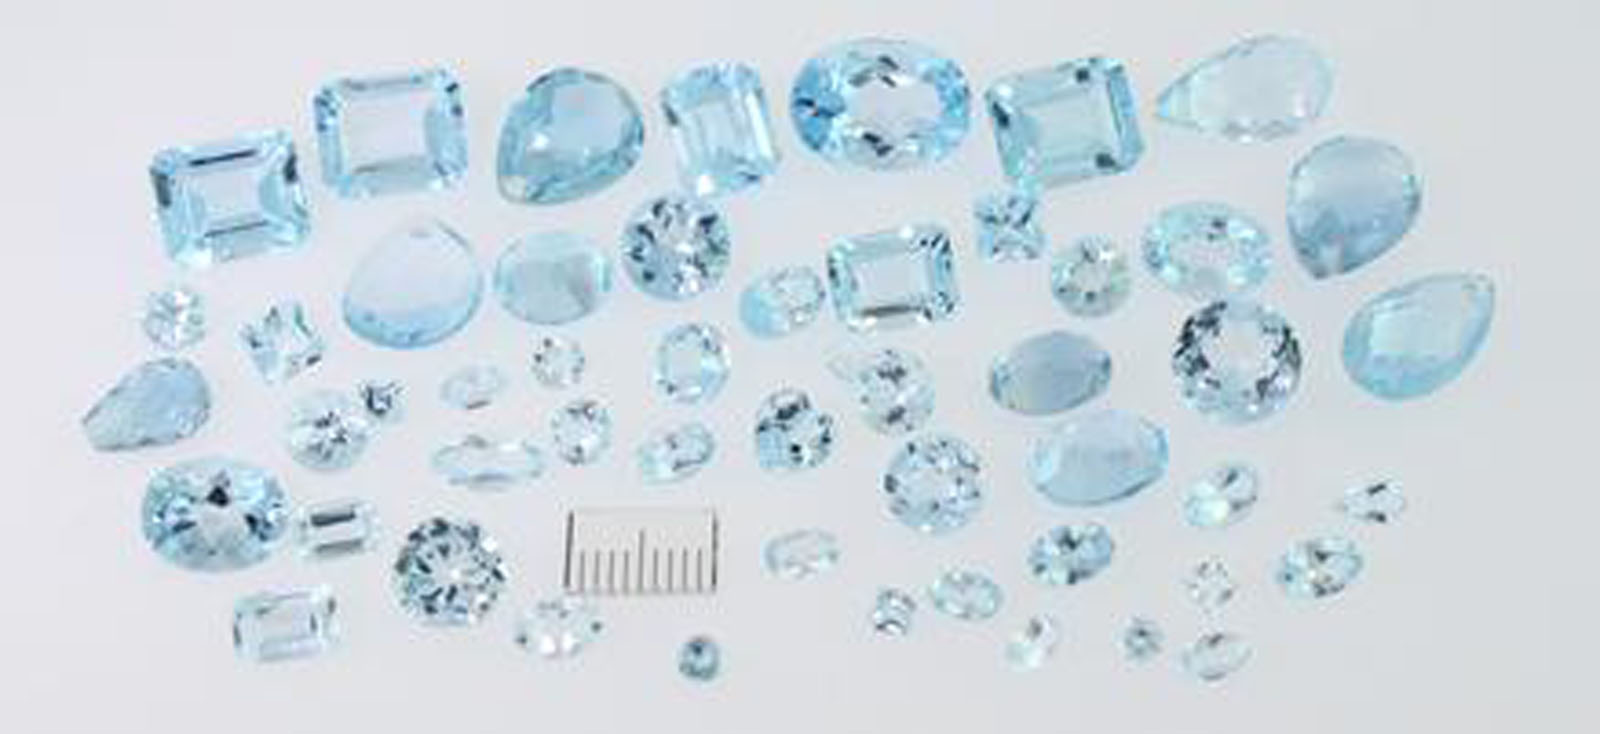 Blue topaz faceted cut - Jewelry stones